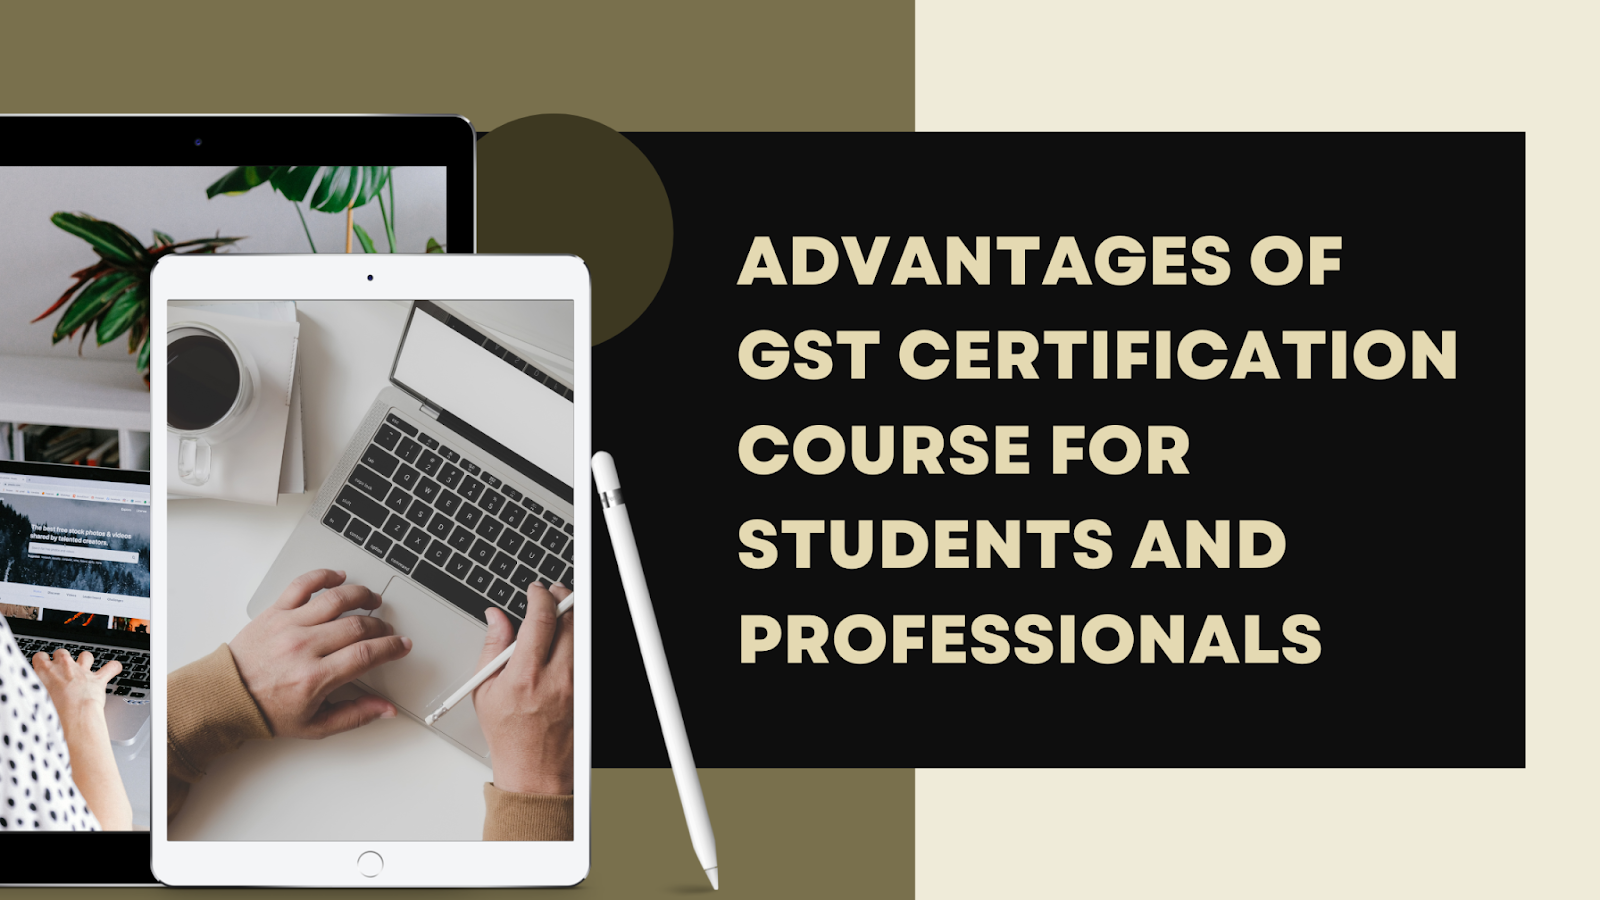 Advantages Of GST Certification Course For Students And Professionals